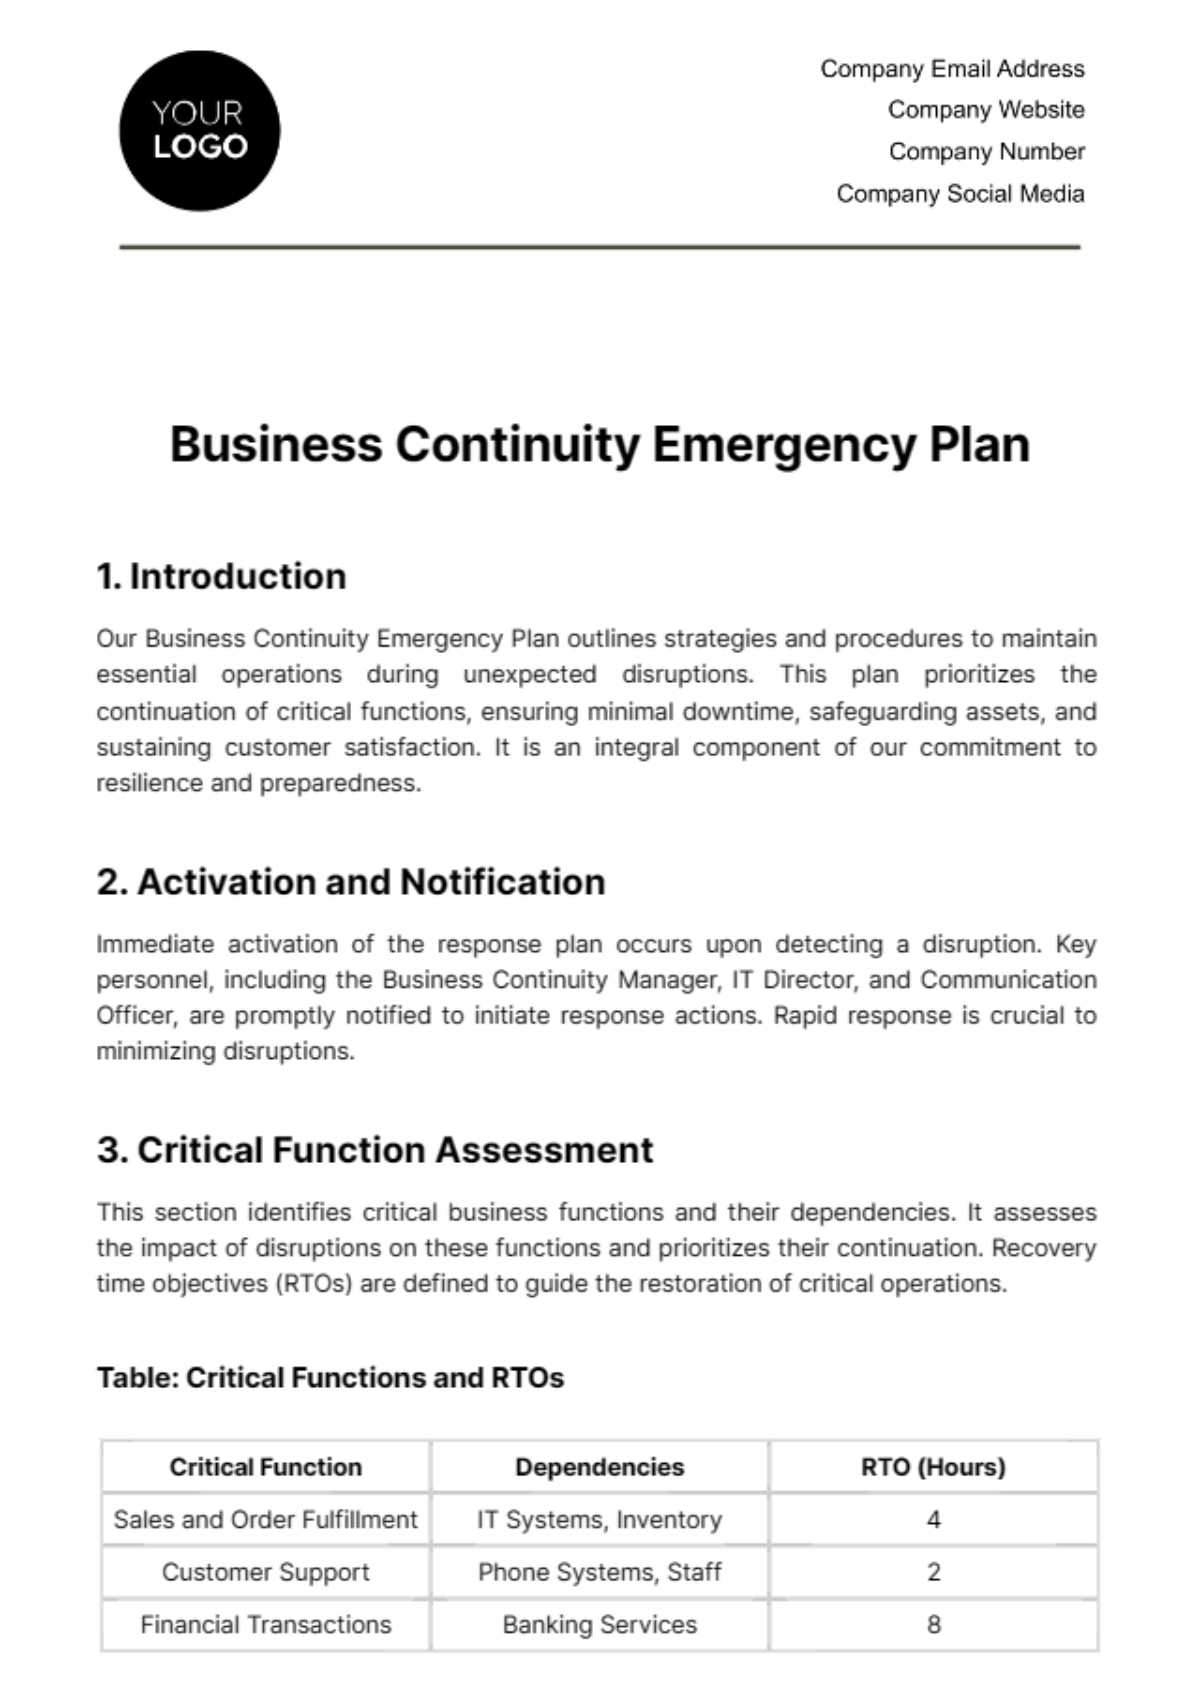 Free Business Continuity Emergency Plan Template